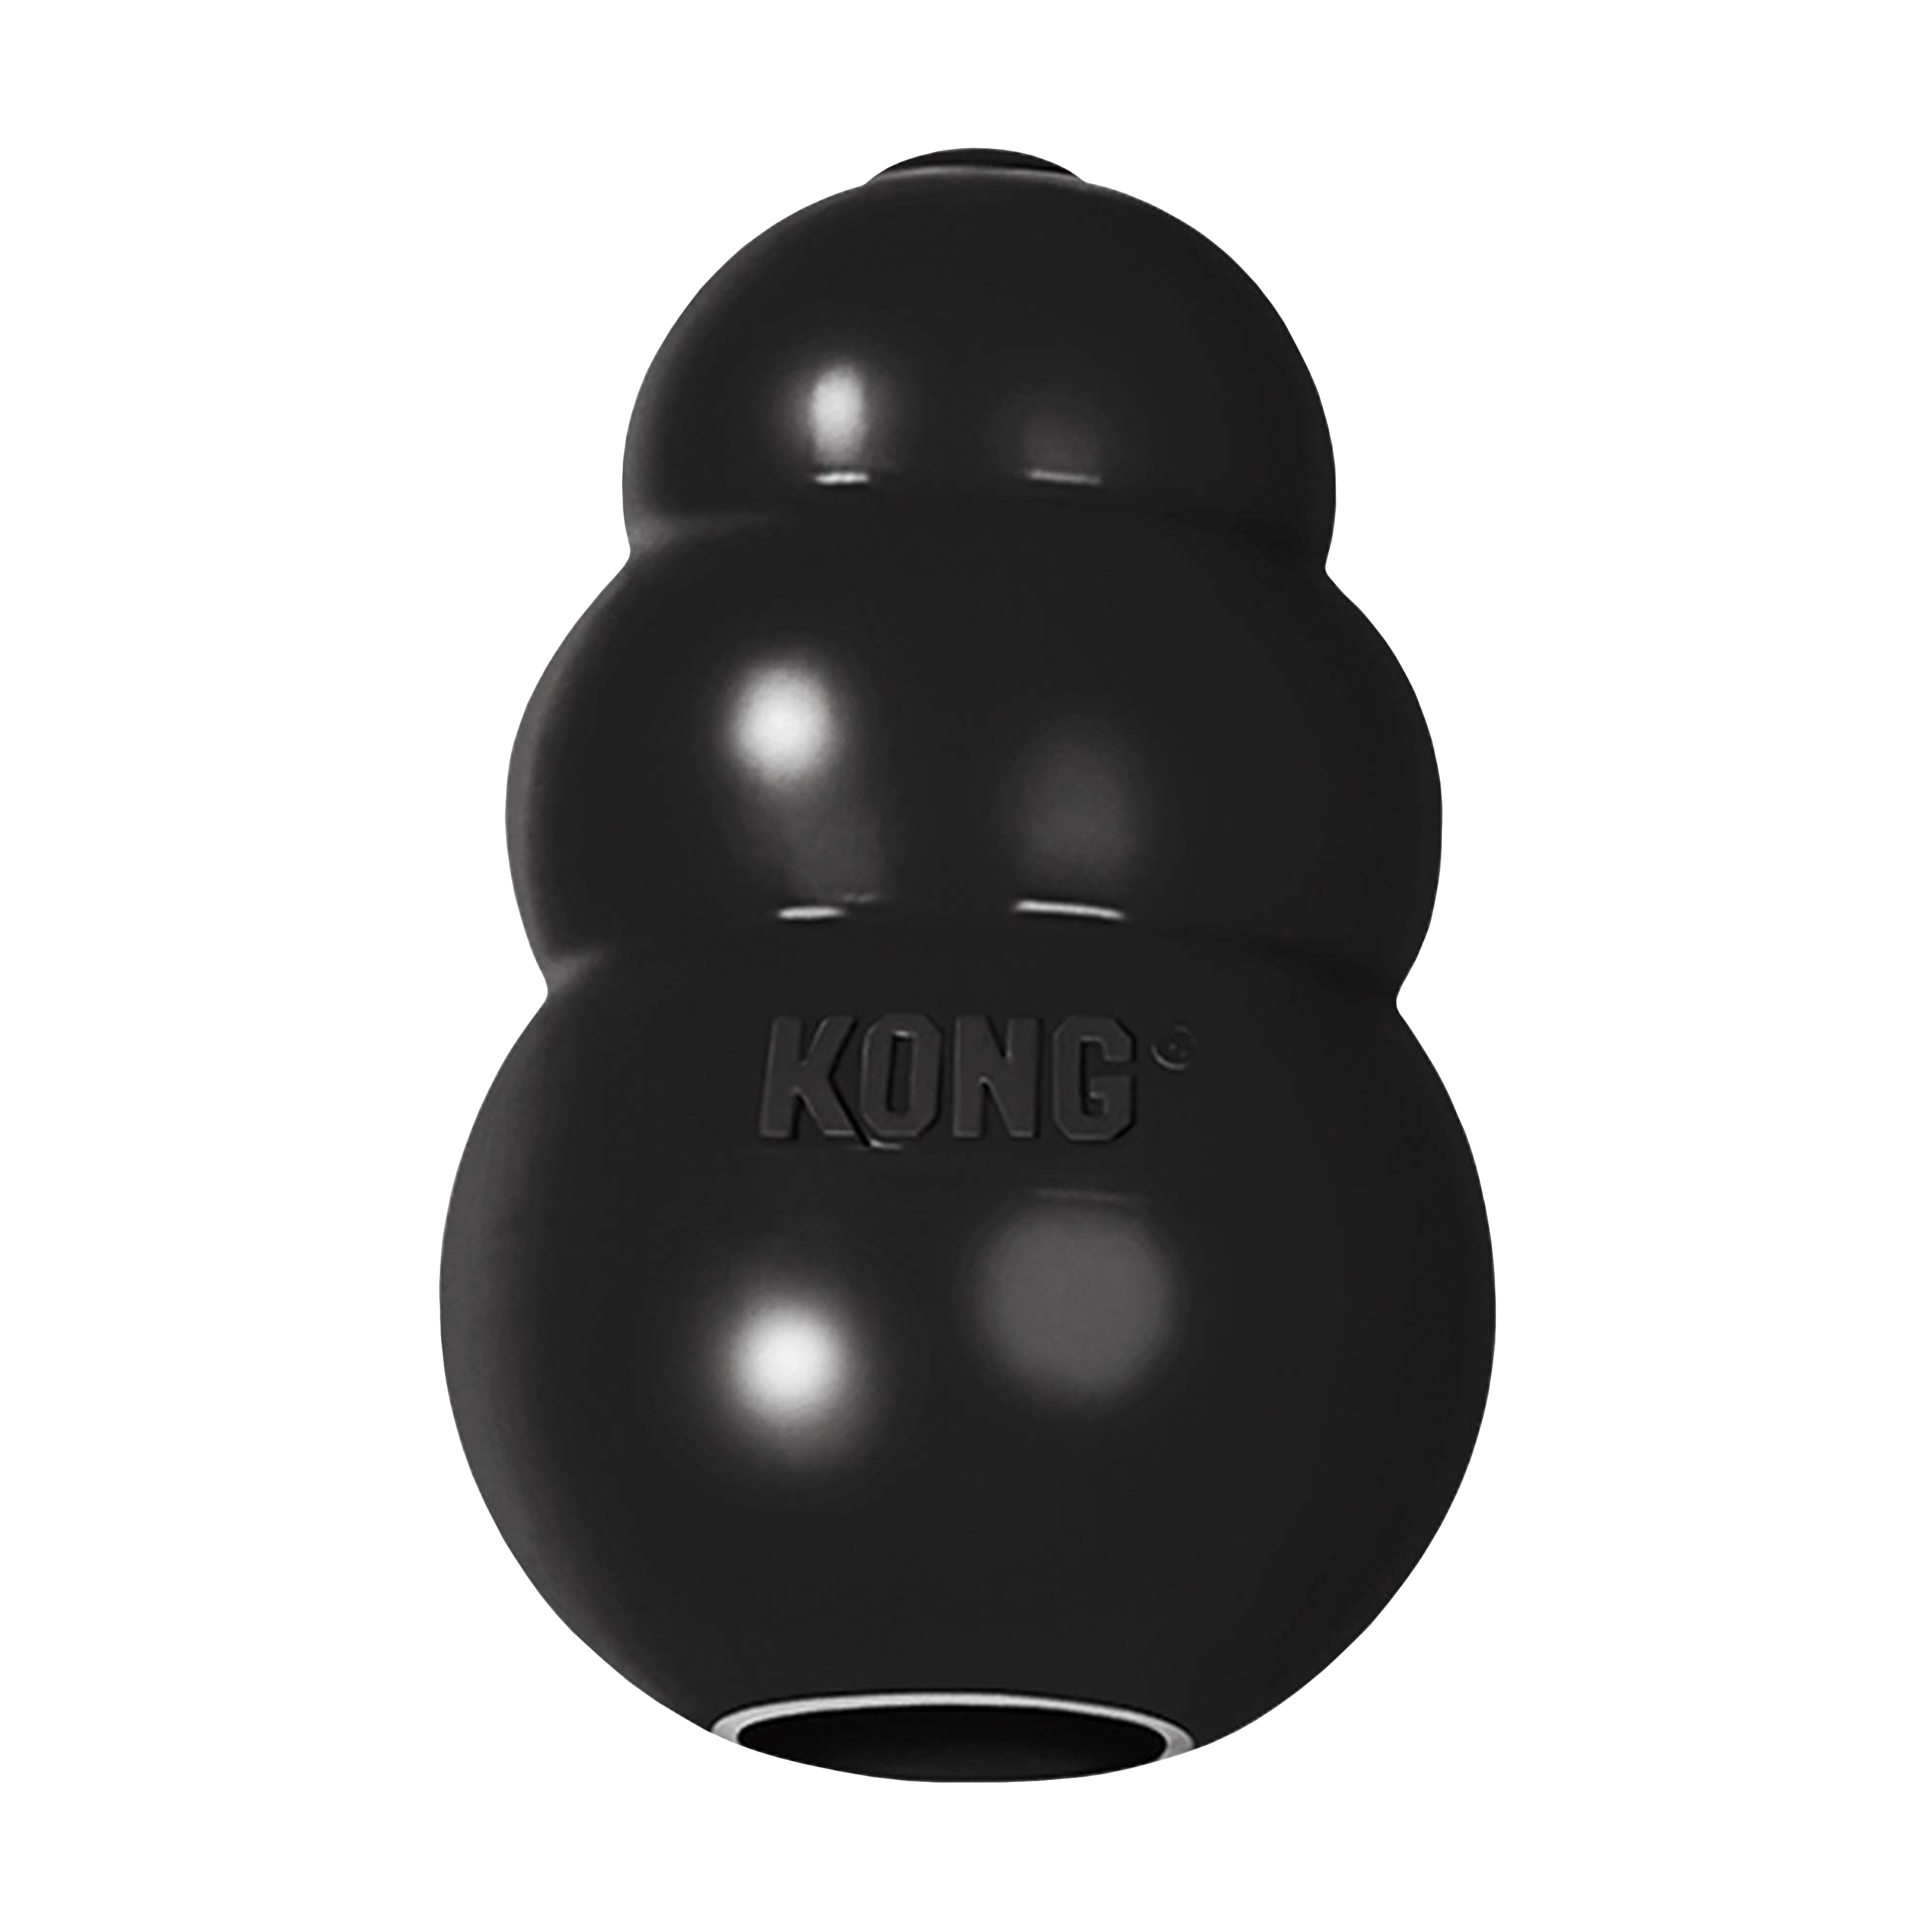 KONG Extreme offpack imagen del producto